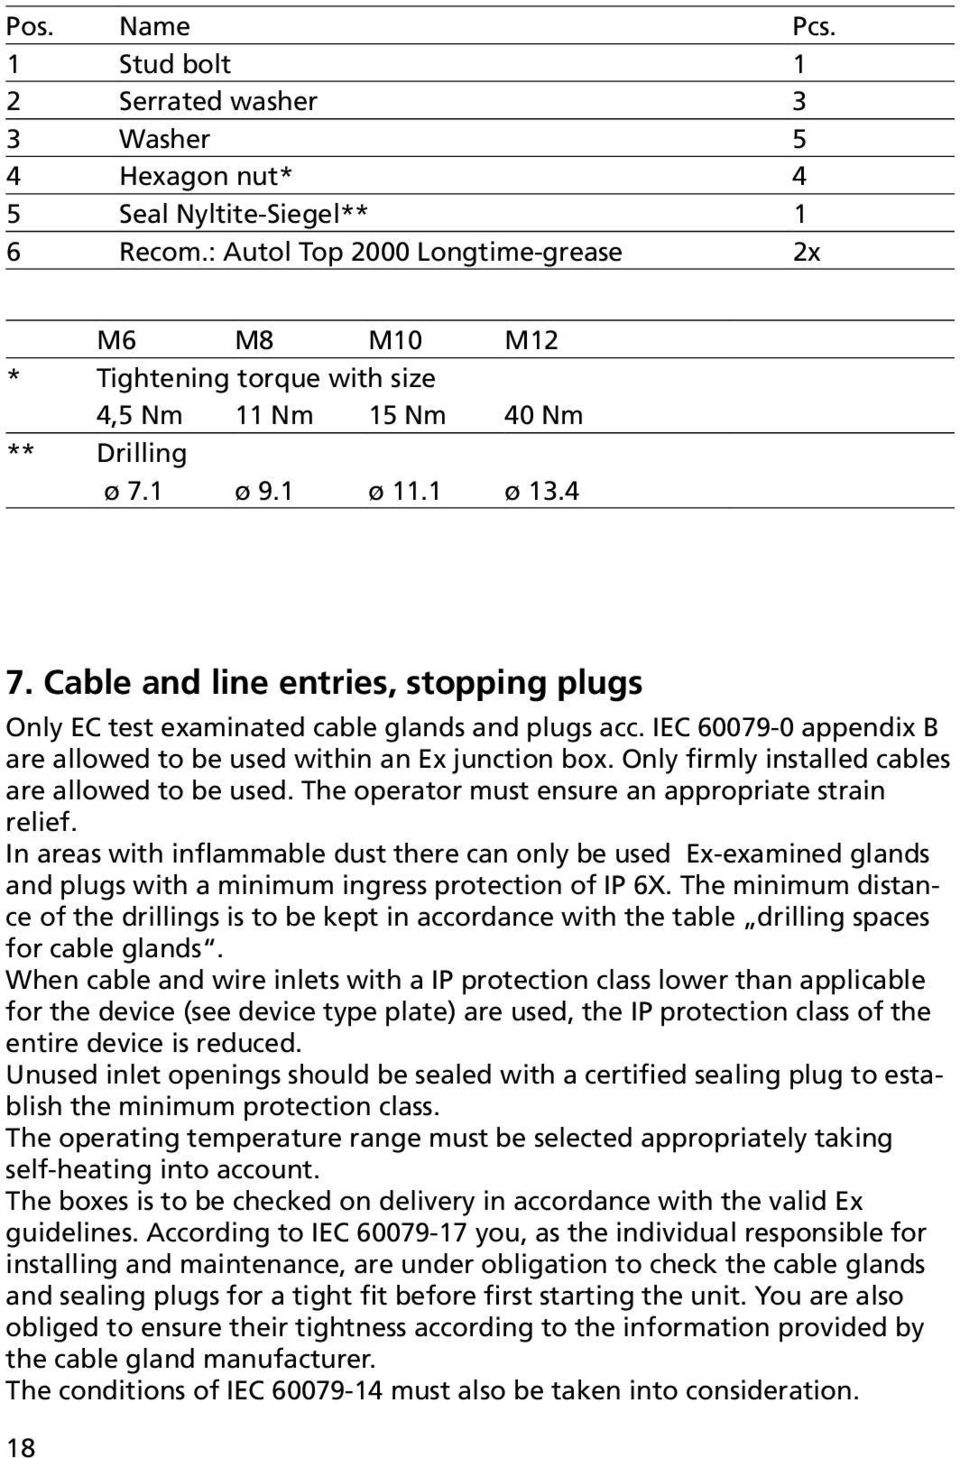 Cable and line entries, stopping plugs Only EC test examinated cable glands and plugs acc. IEC 60079-0 appendix B are allowed to be used within an Ex junction box.